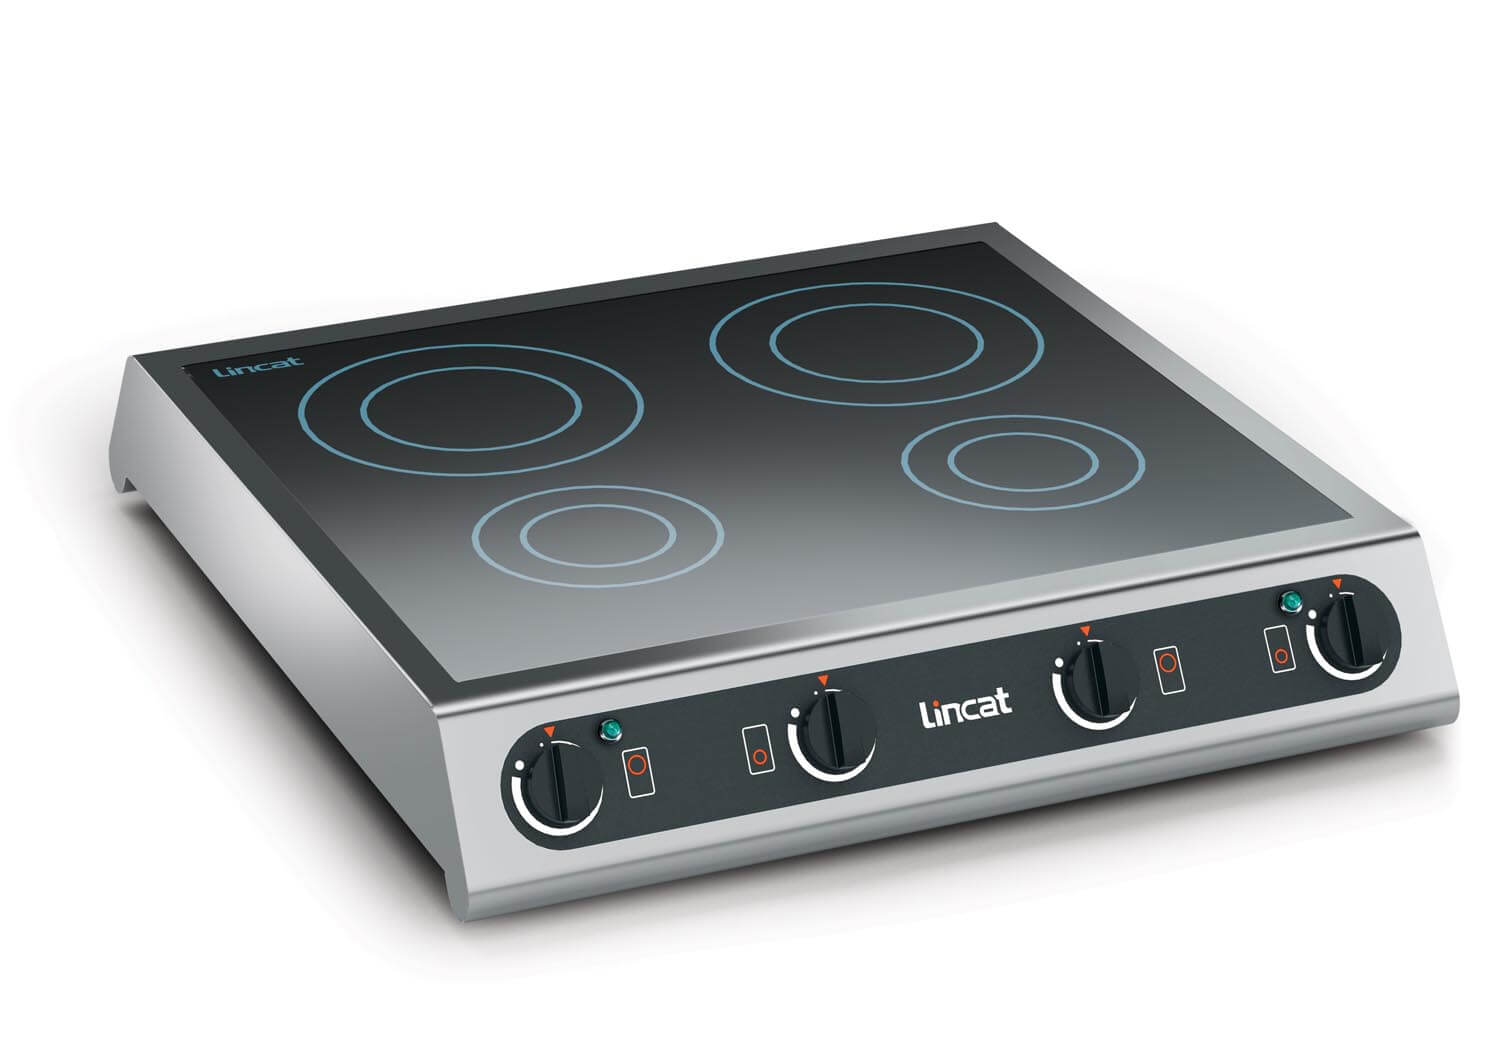 LiberoPro Plug-in induction Griddle, stainless steel smooth plate (600886)